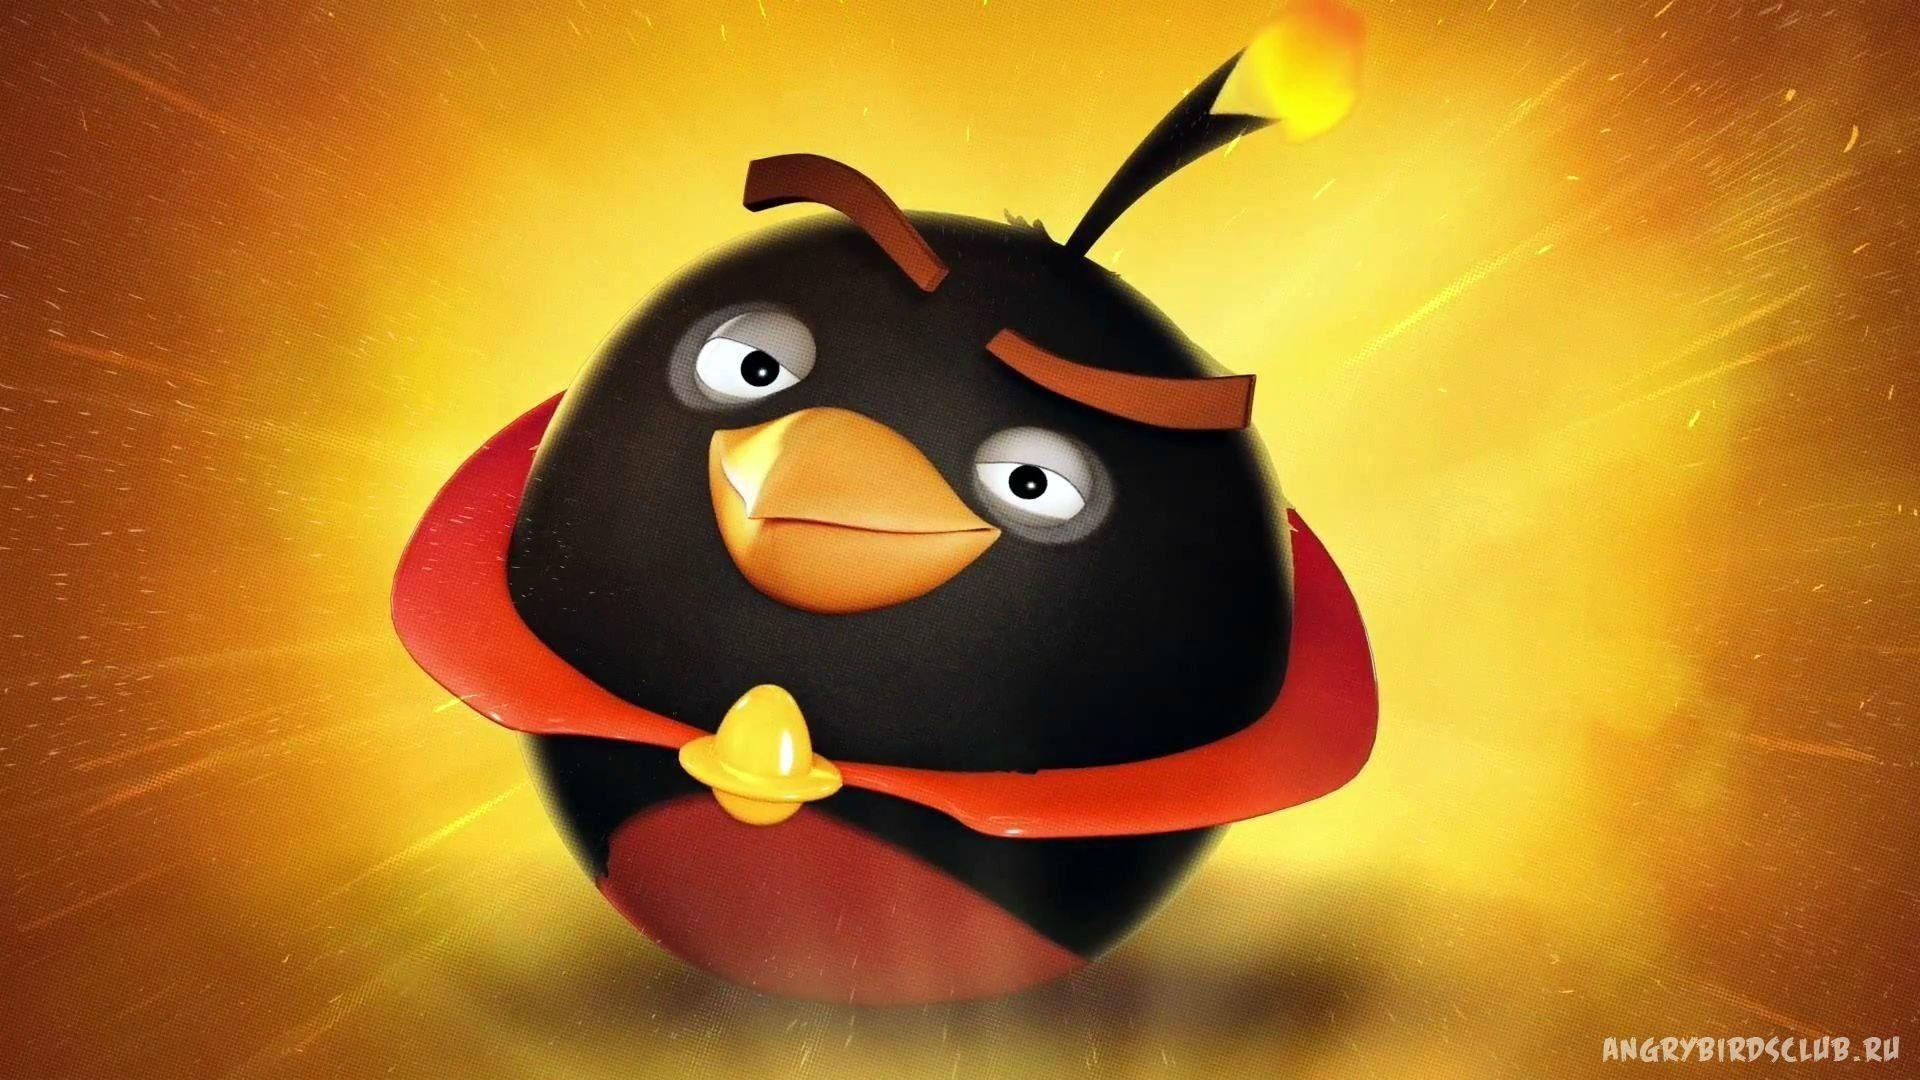 Angry Bird Wallpaper Beautiful Angry Birds Space Wallpaper Best